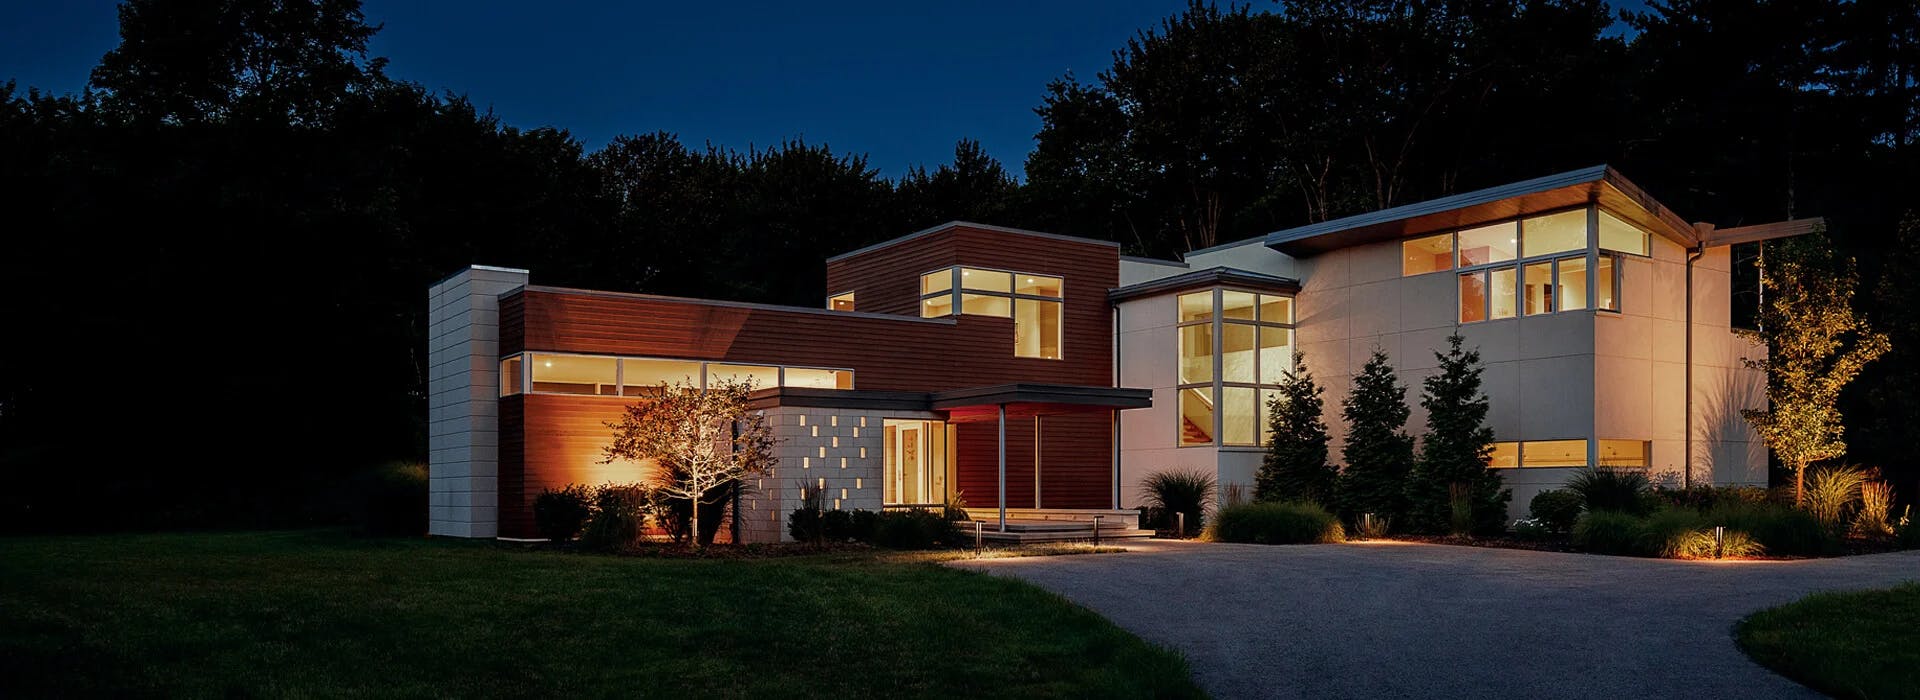 Exterior of a contemporary house at night alit with interior and exterior lights.